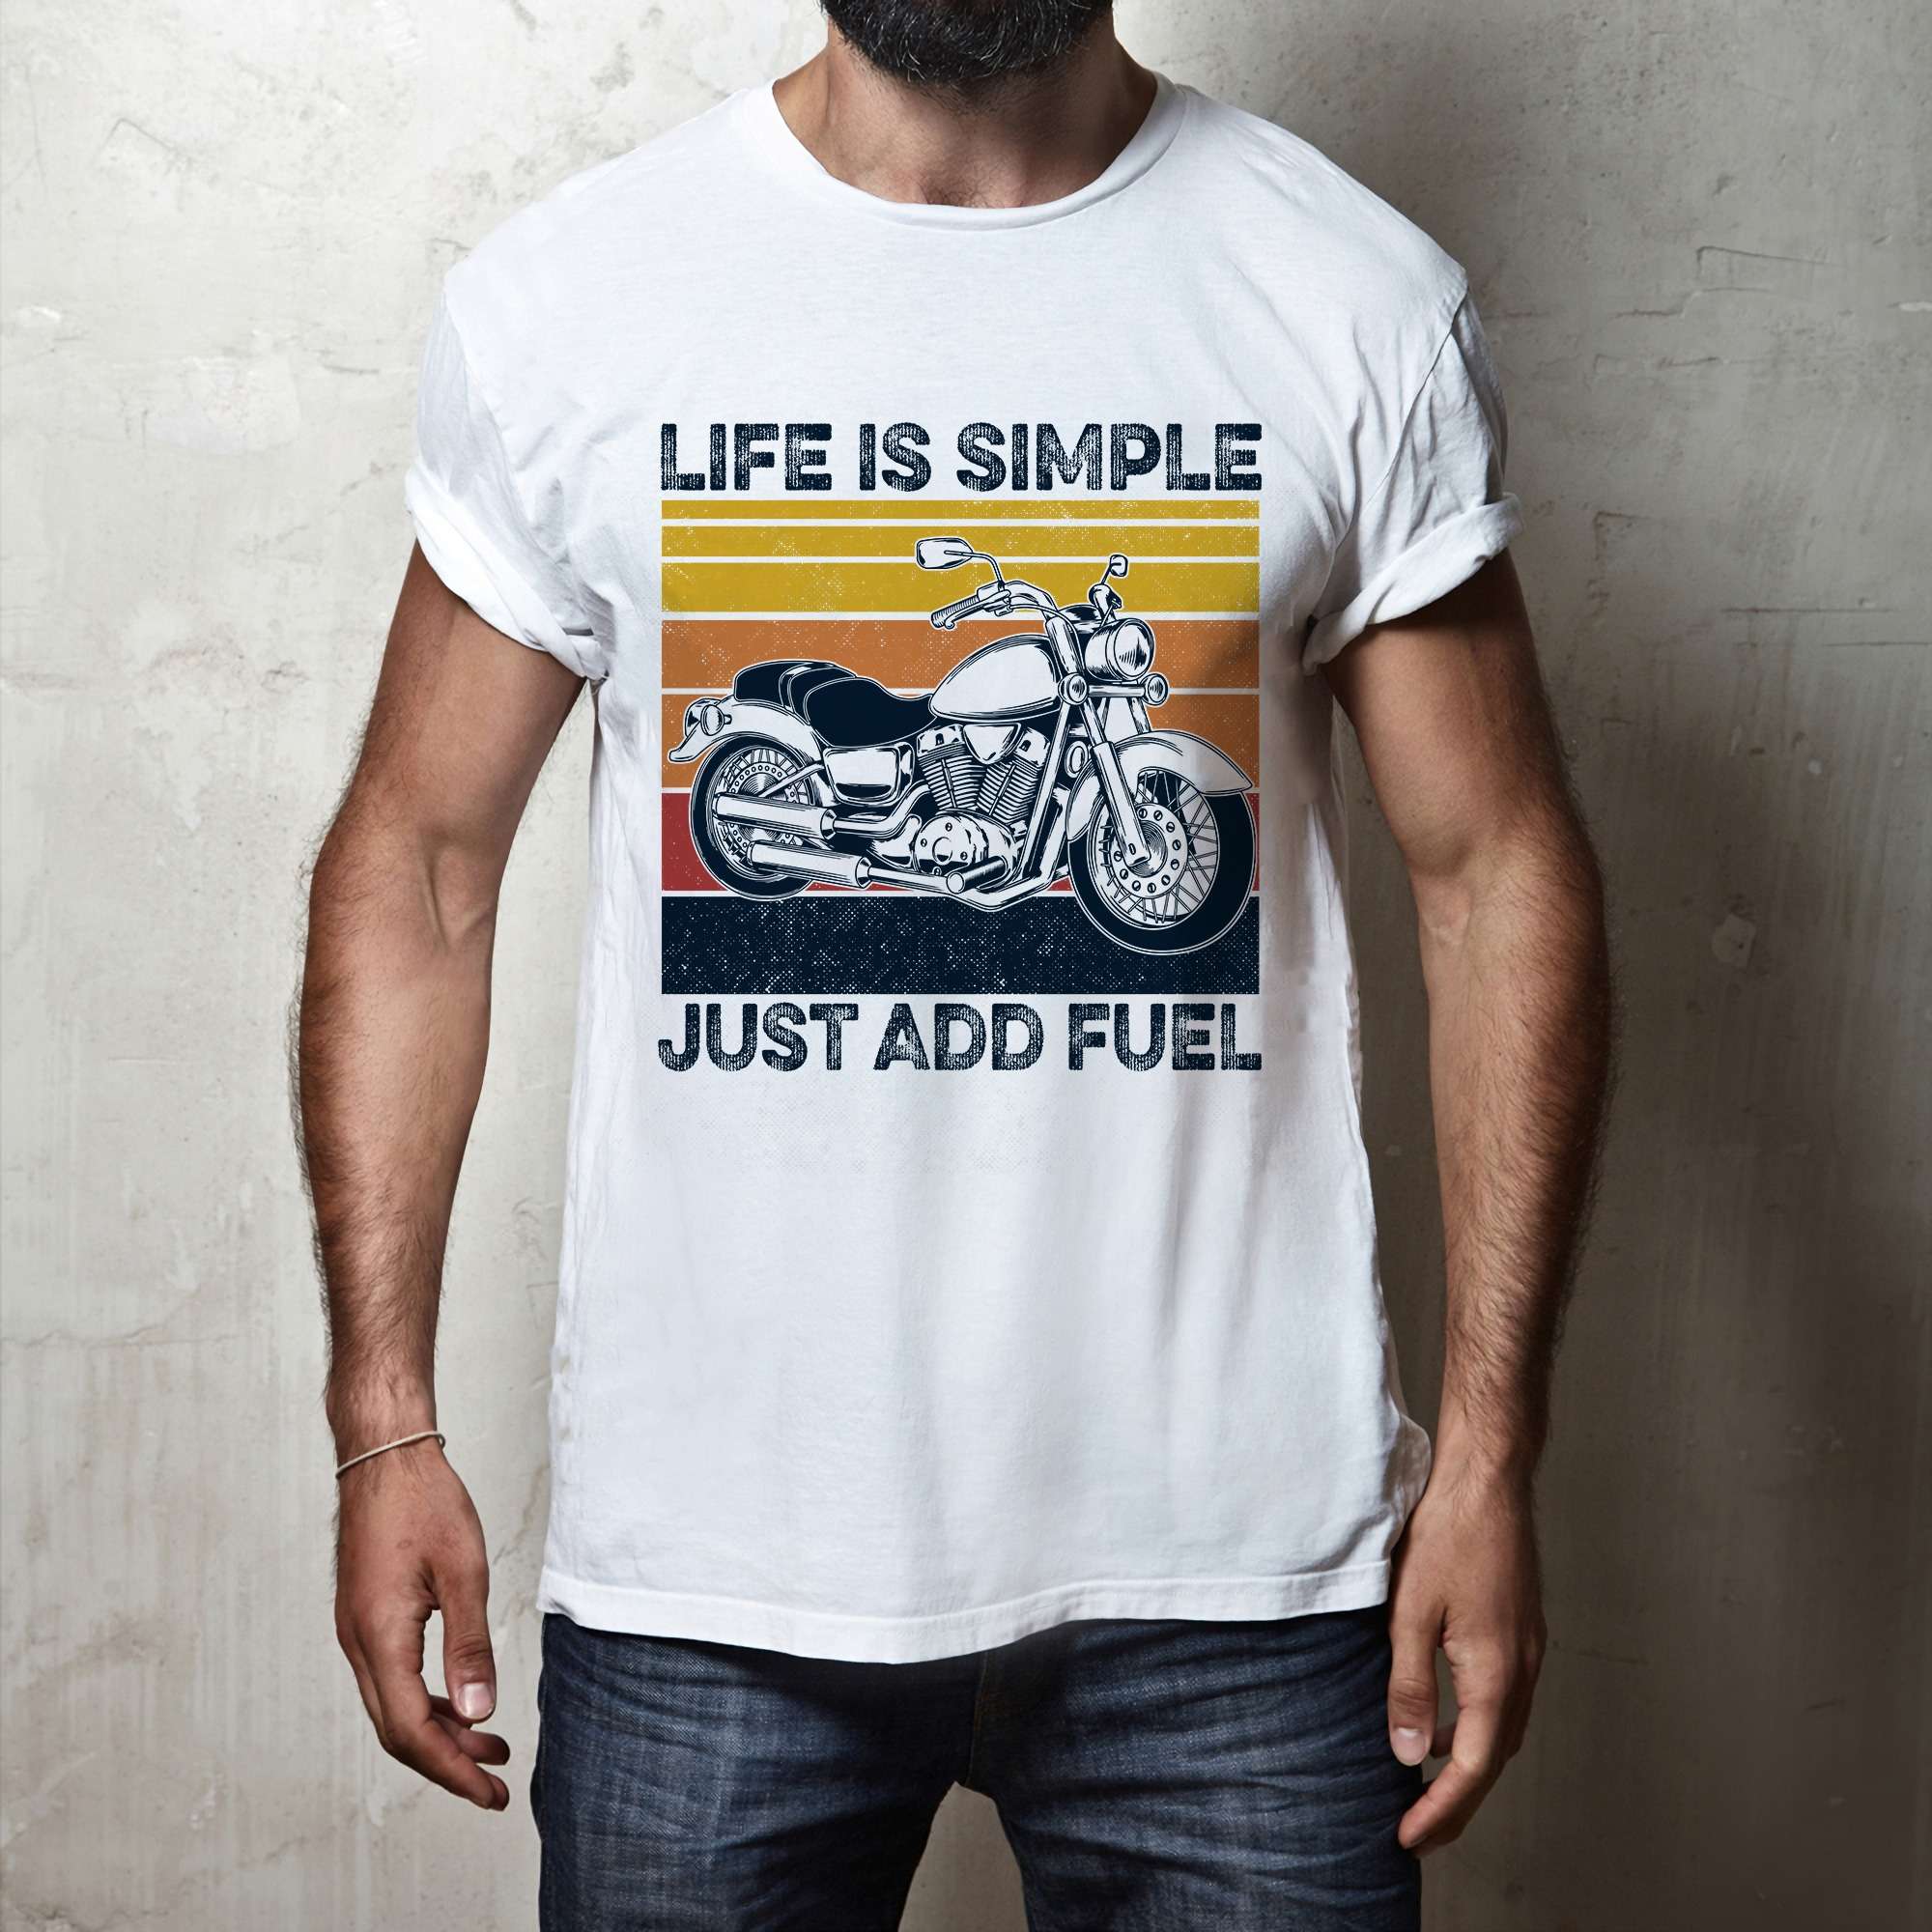 Life is simple, just add fuel - Add fuel into motorcycle, gift for motorcycle rider